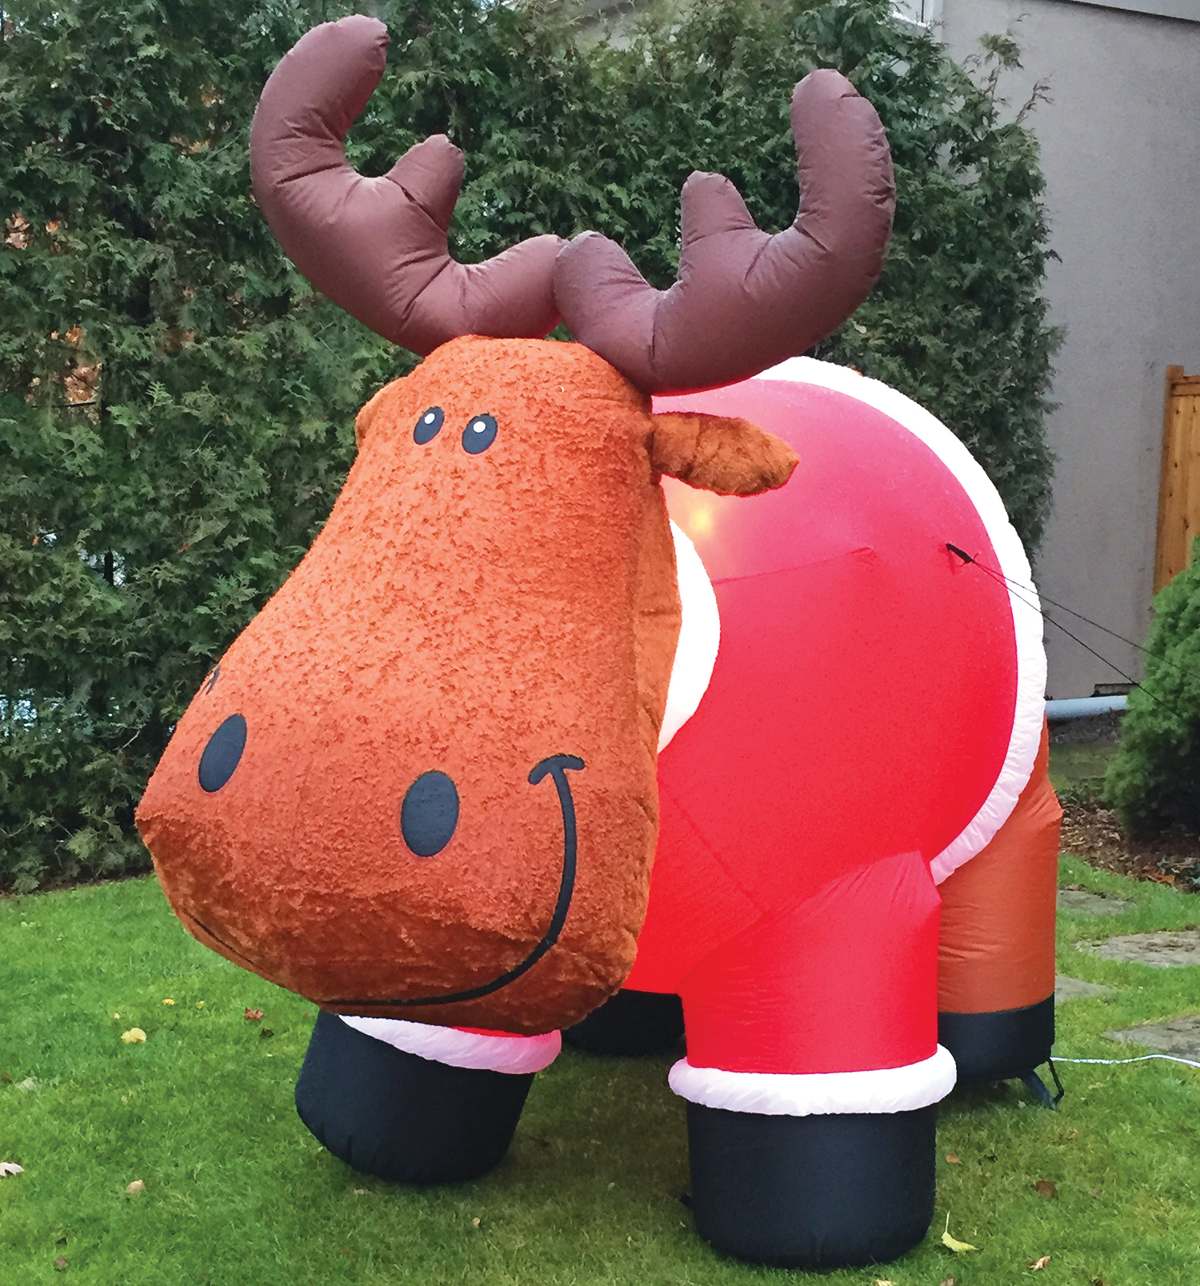 Inflatable moose on lawn. Photo By Robin Dickie.